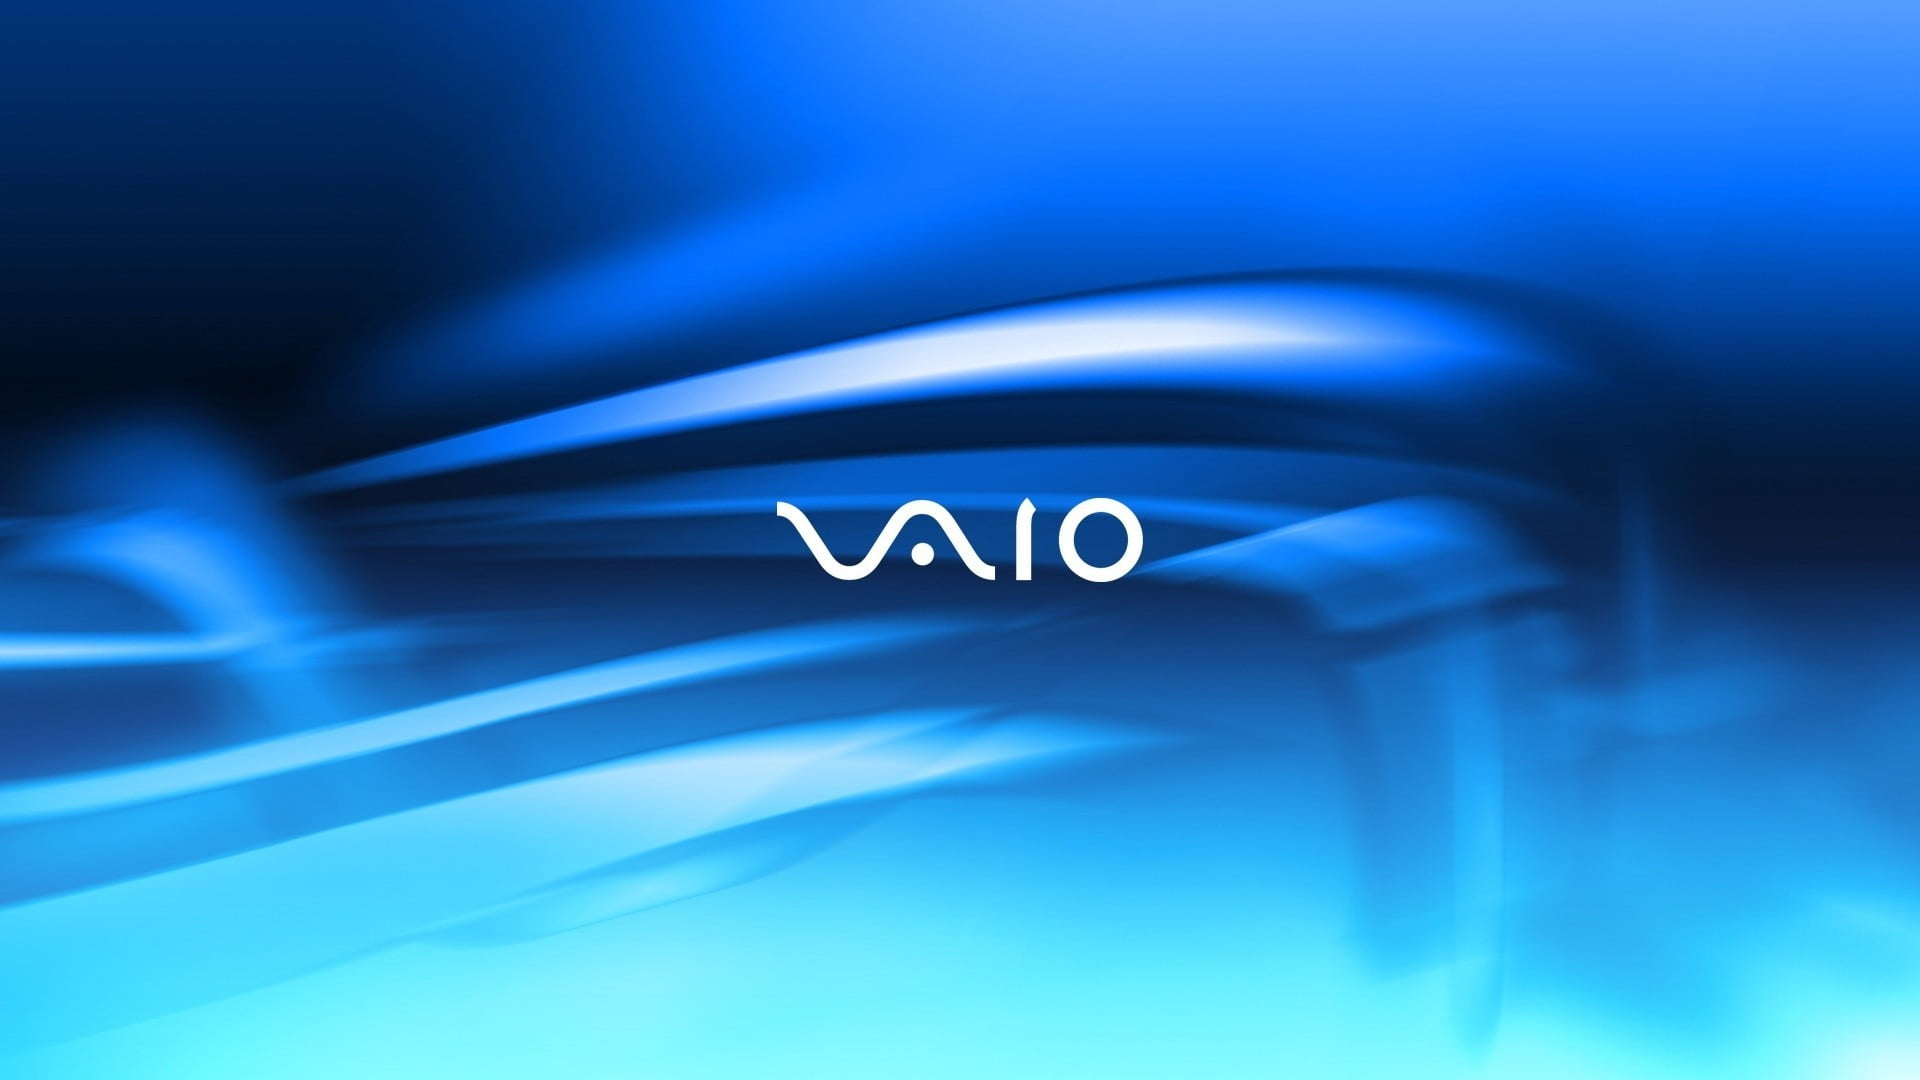 Black And White Electronic Device Sony Vaio Hd Wallpaper Wallpaper Flare